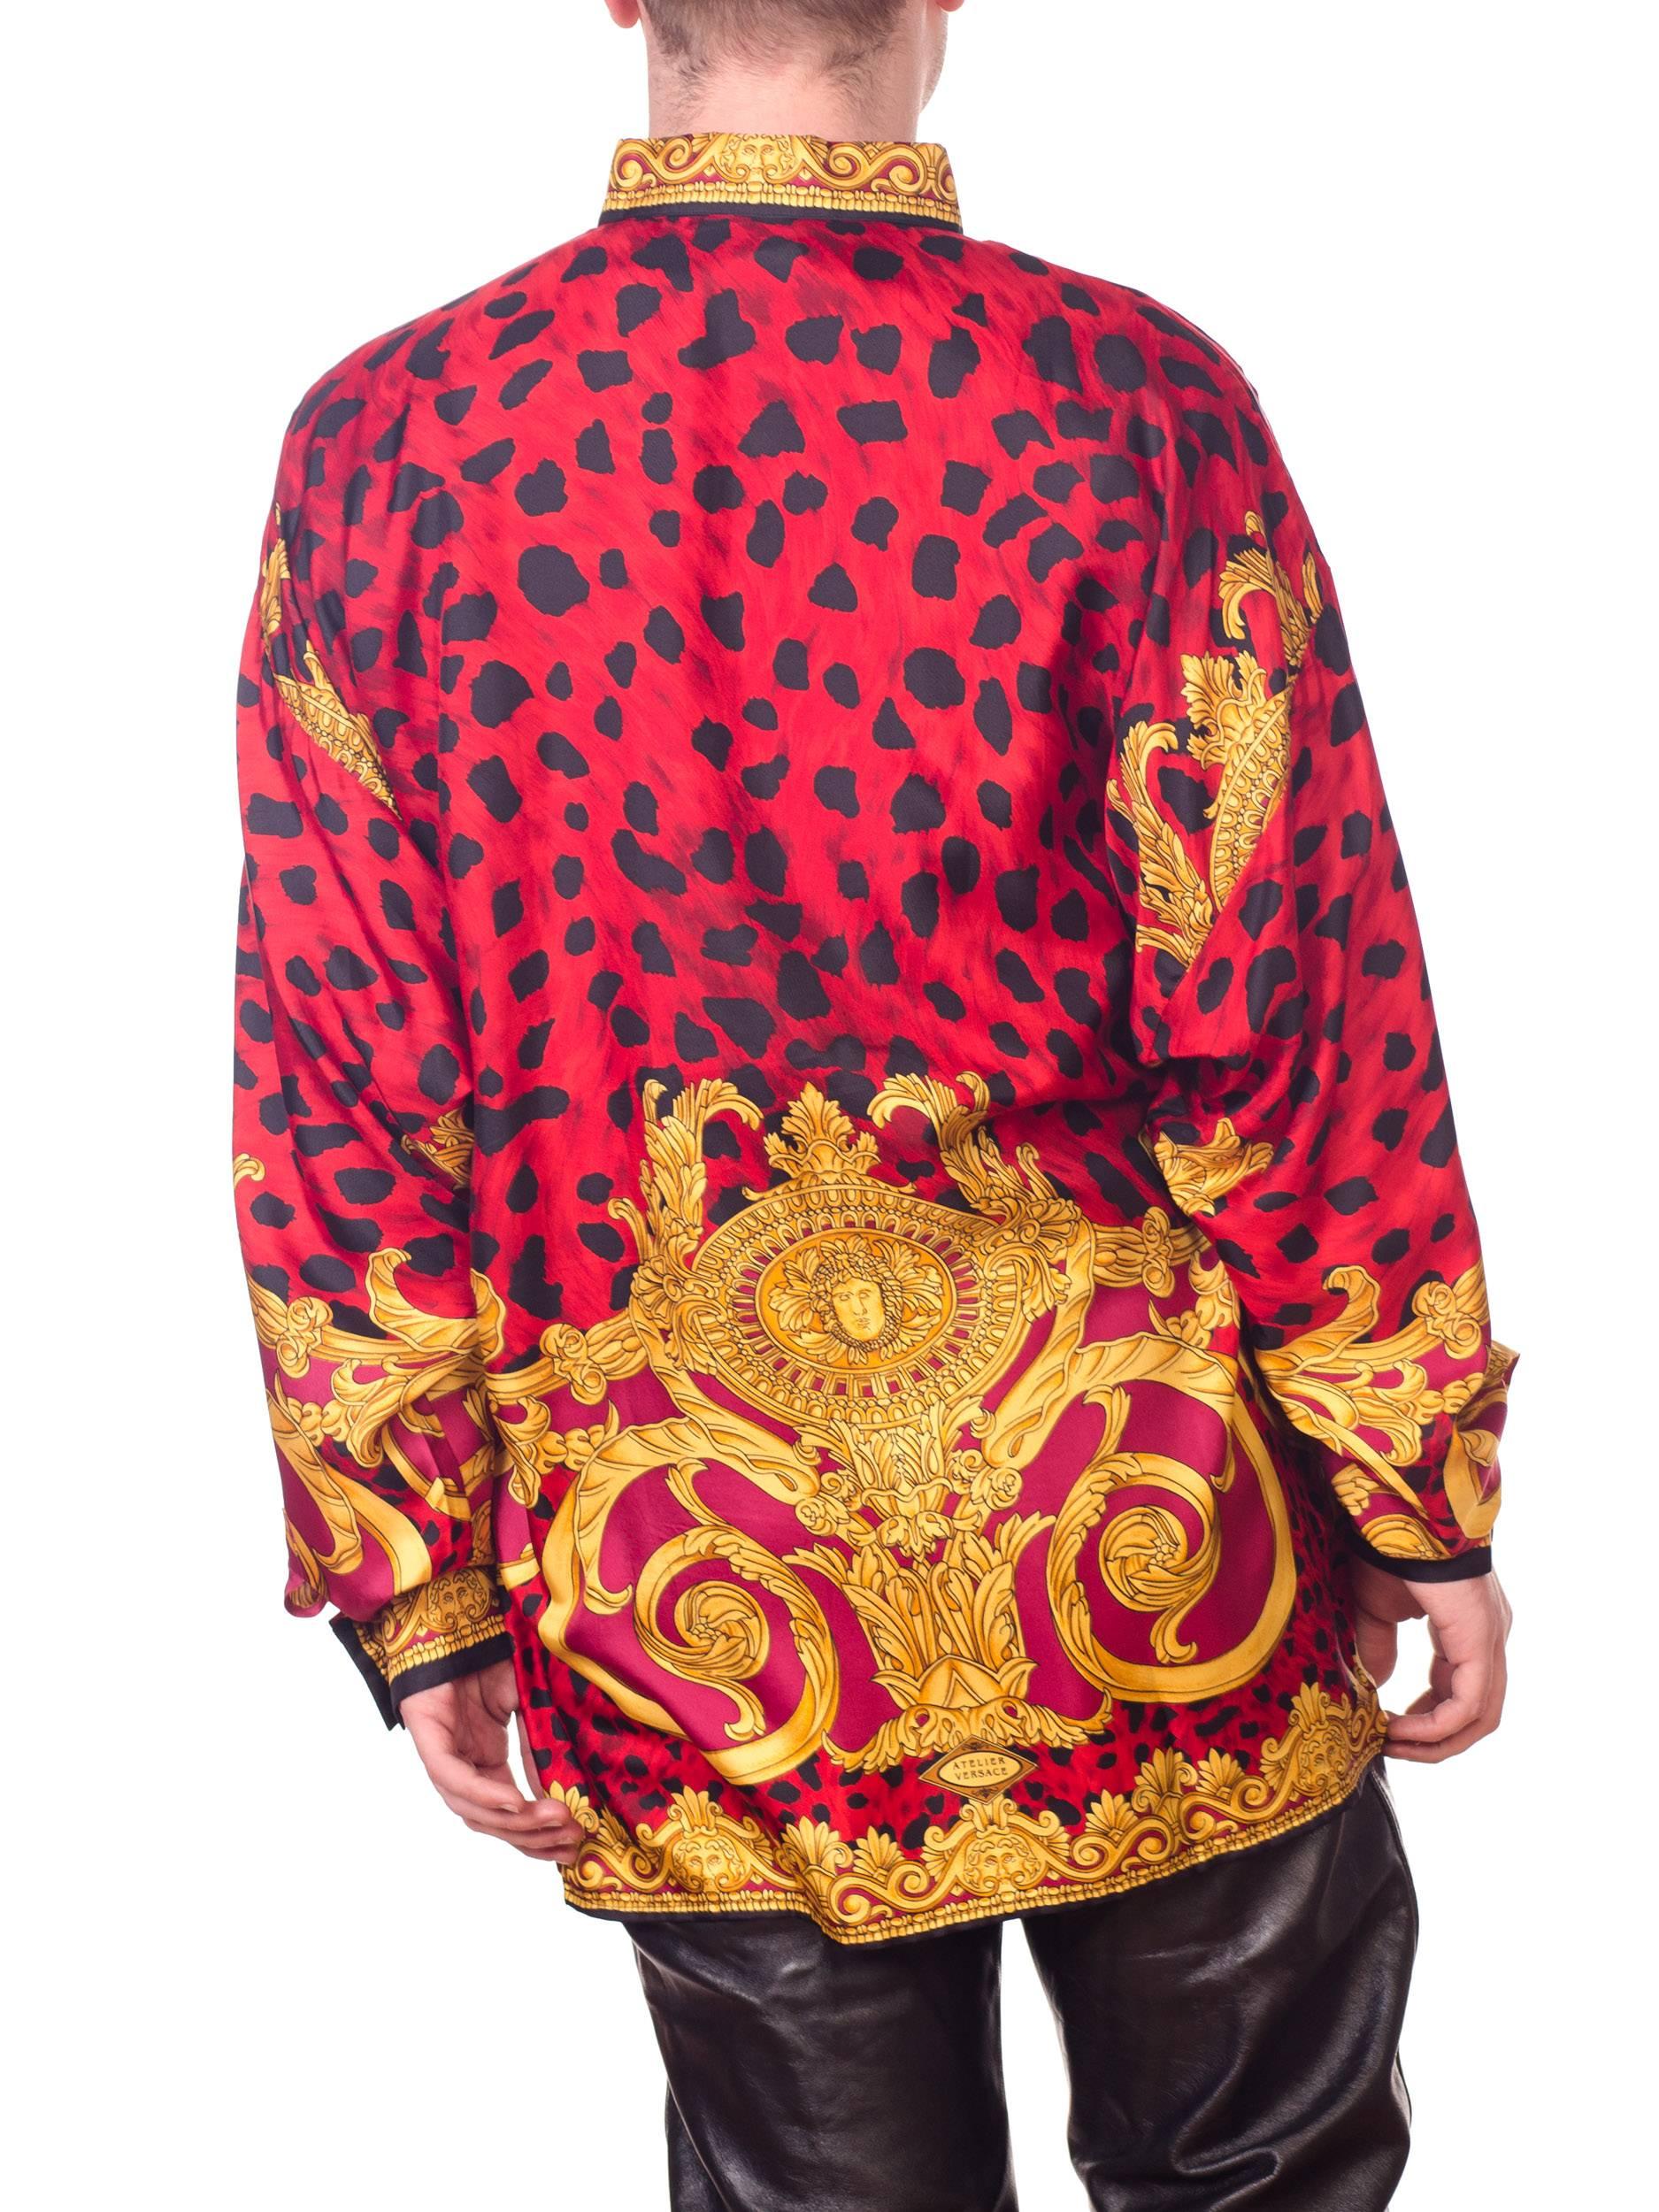 Gianni Versace early 1990s Mens Red Baroque Leopard Print Silk Shirt 3